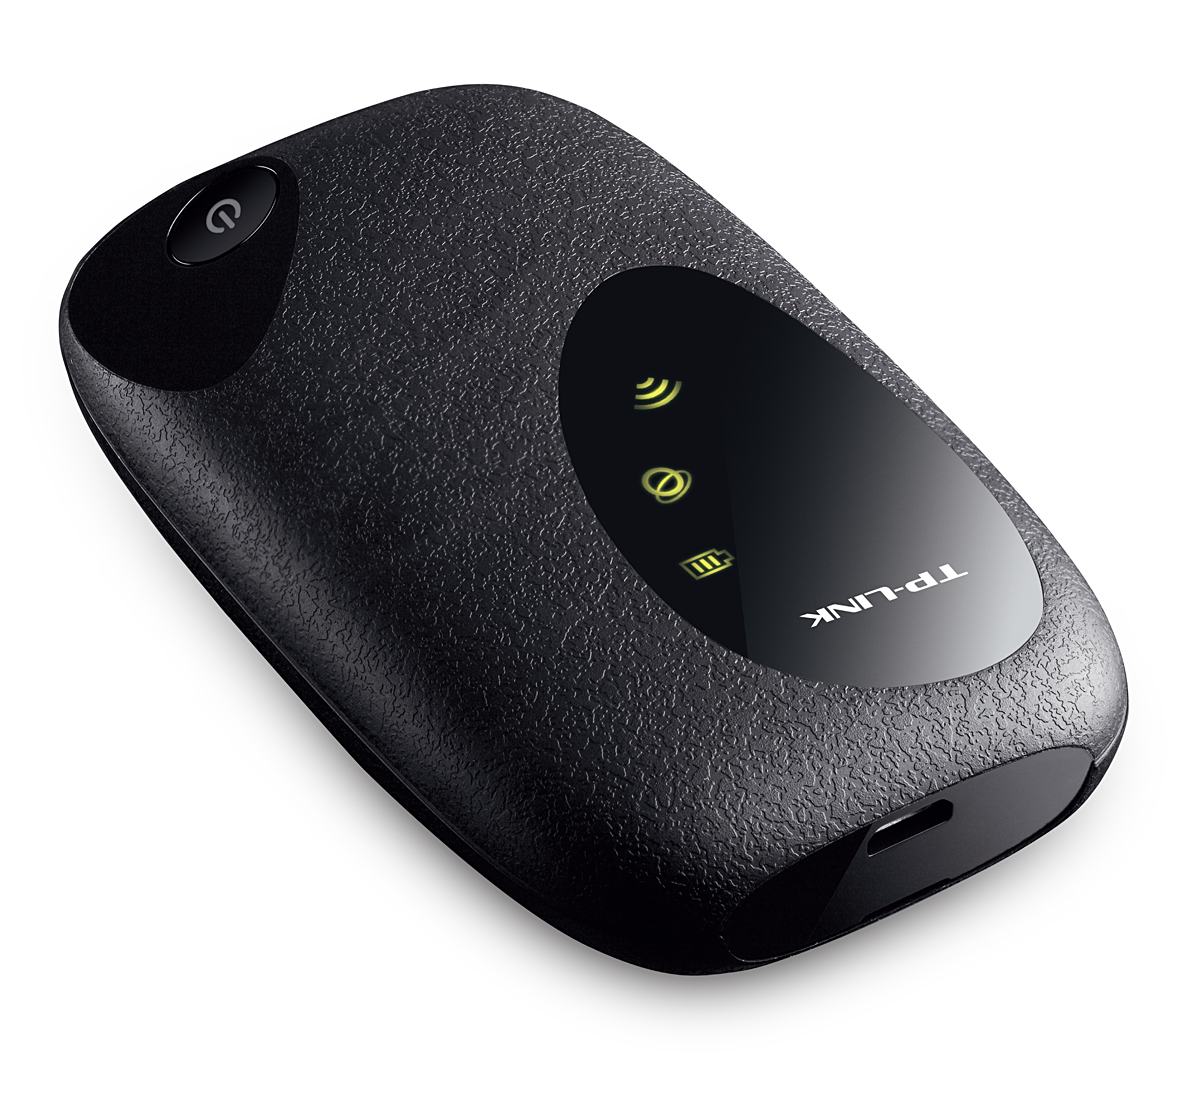 TP-LINK 3G Mobile Wi-Fi M5250